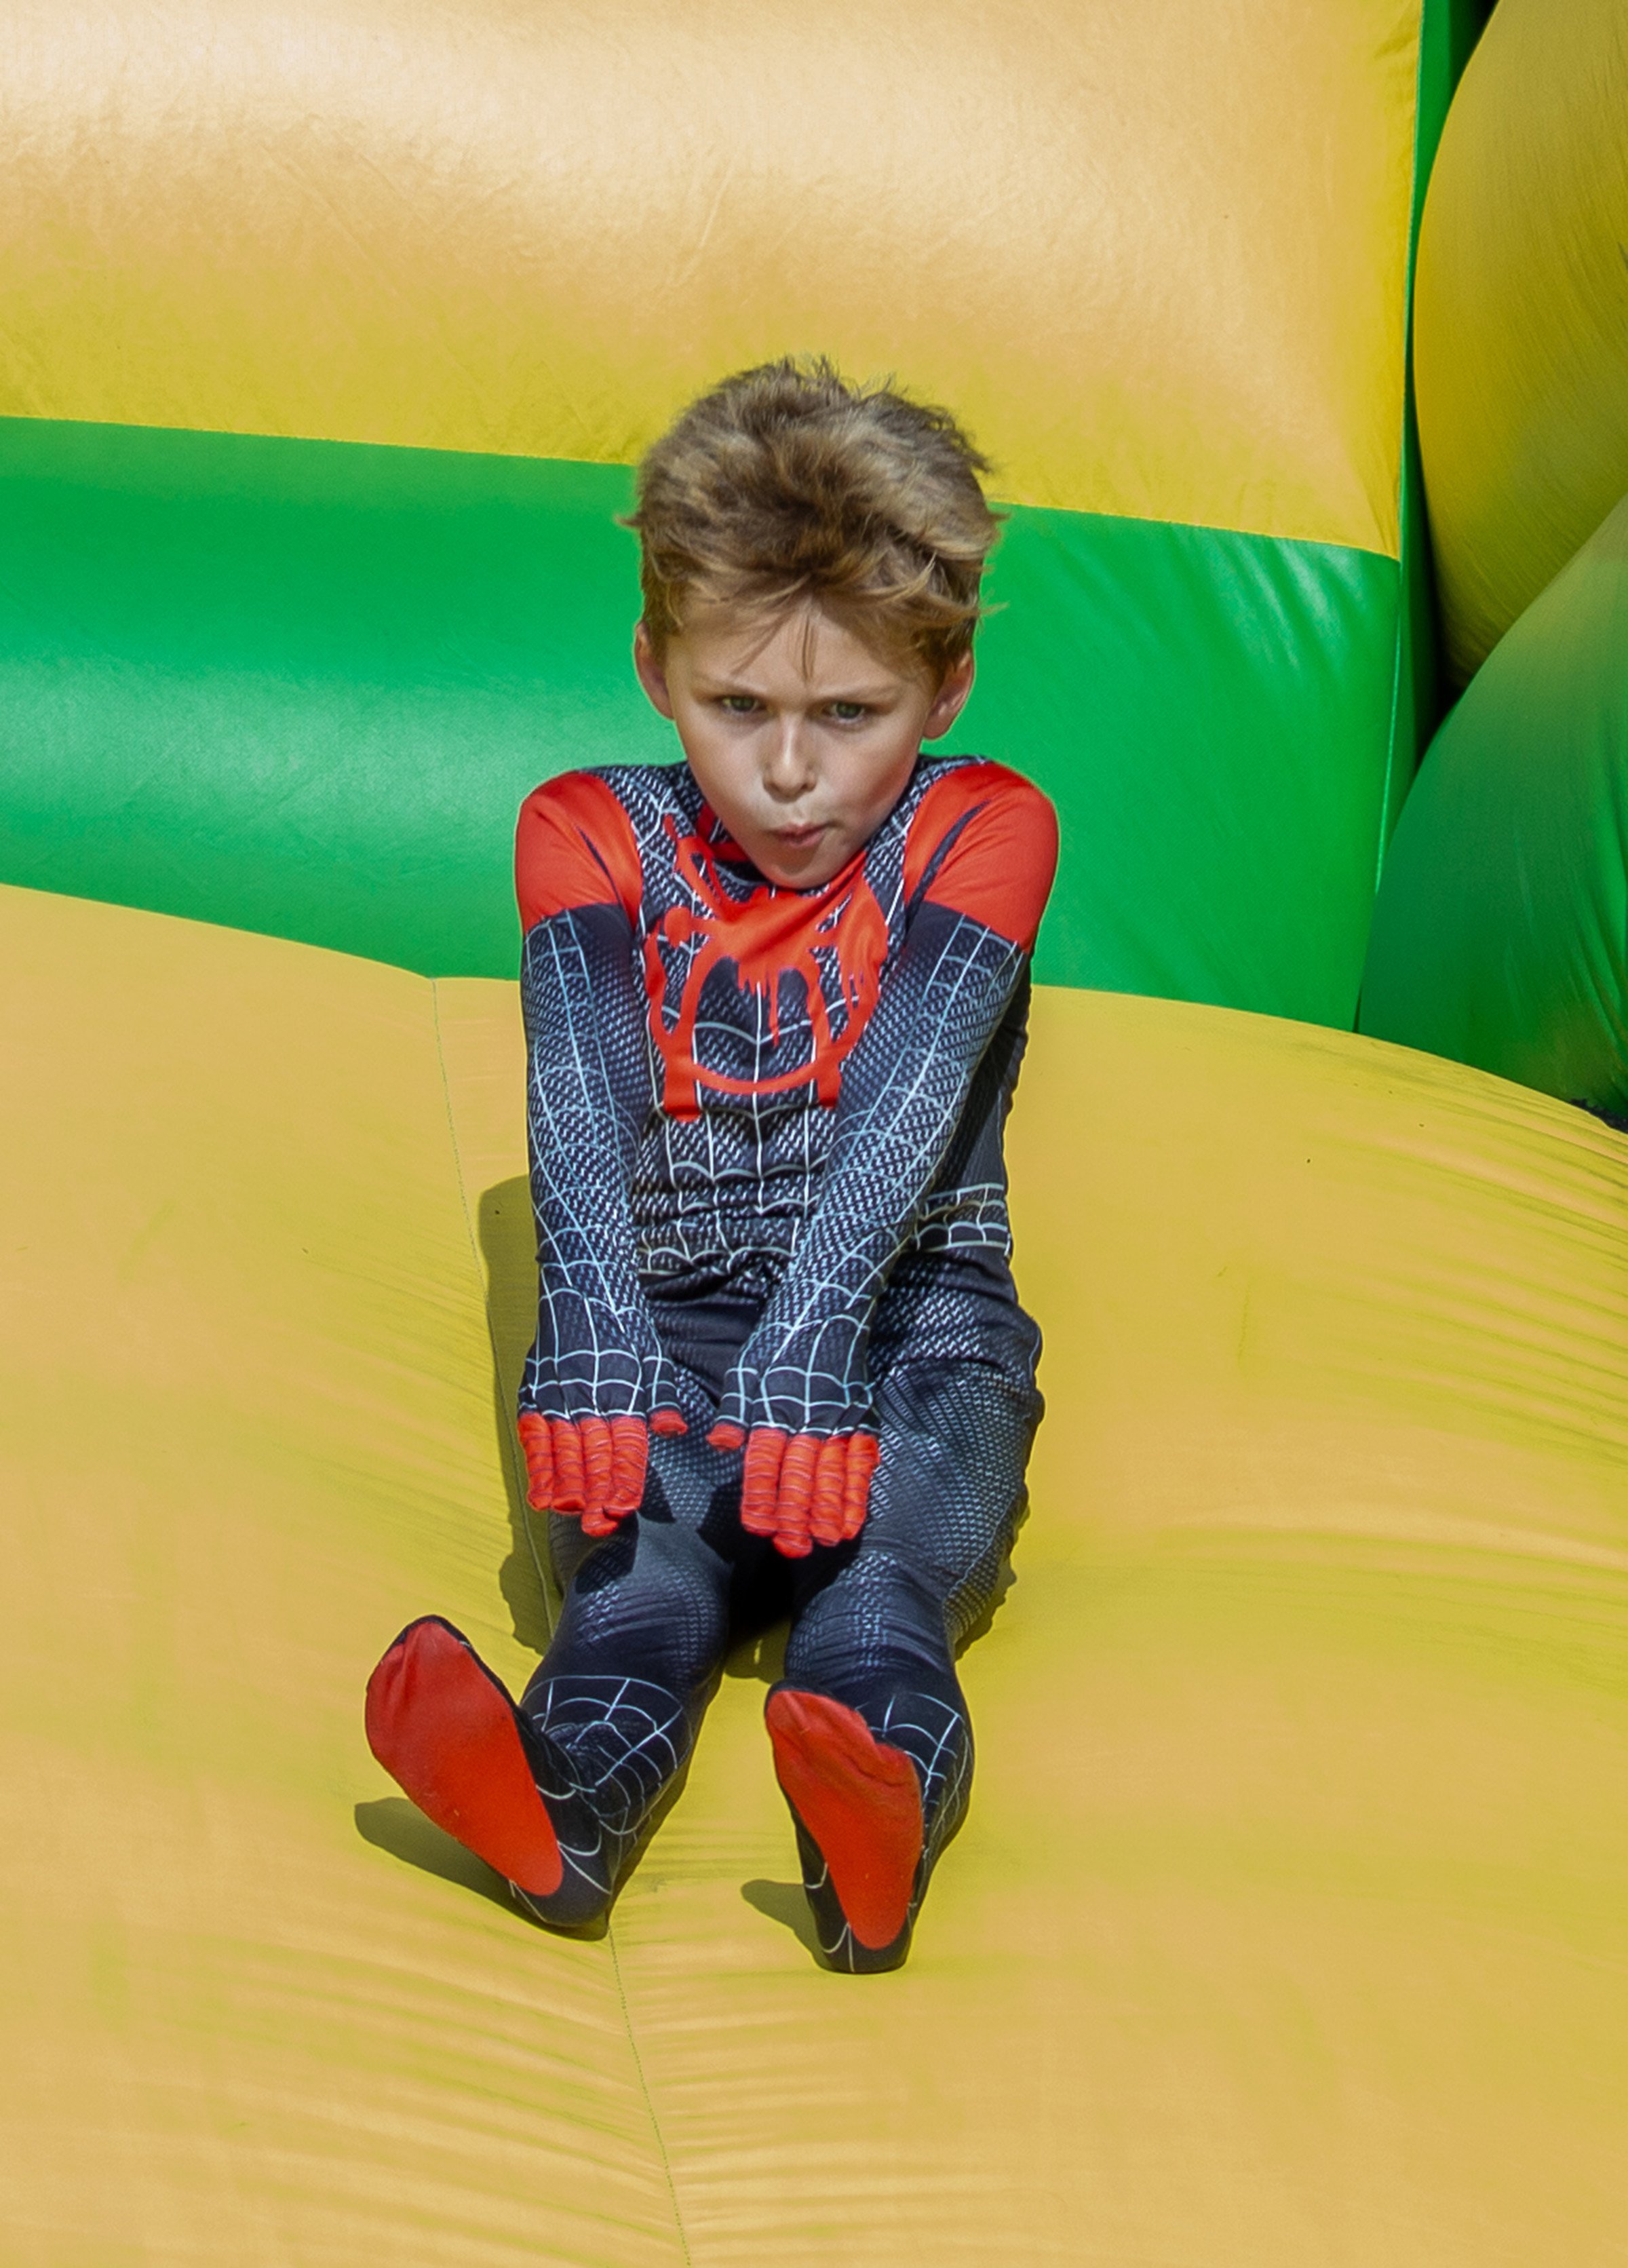 Spiderman Silly Face on Inflatable Slide.jpg